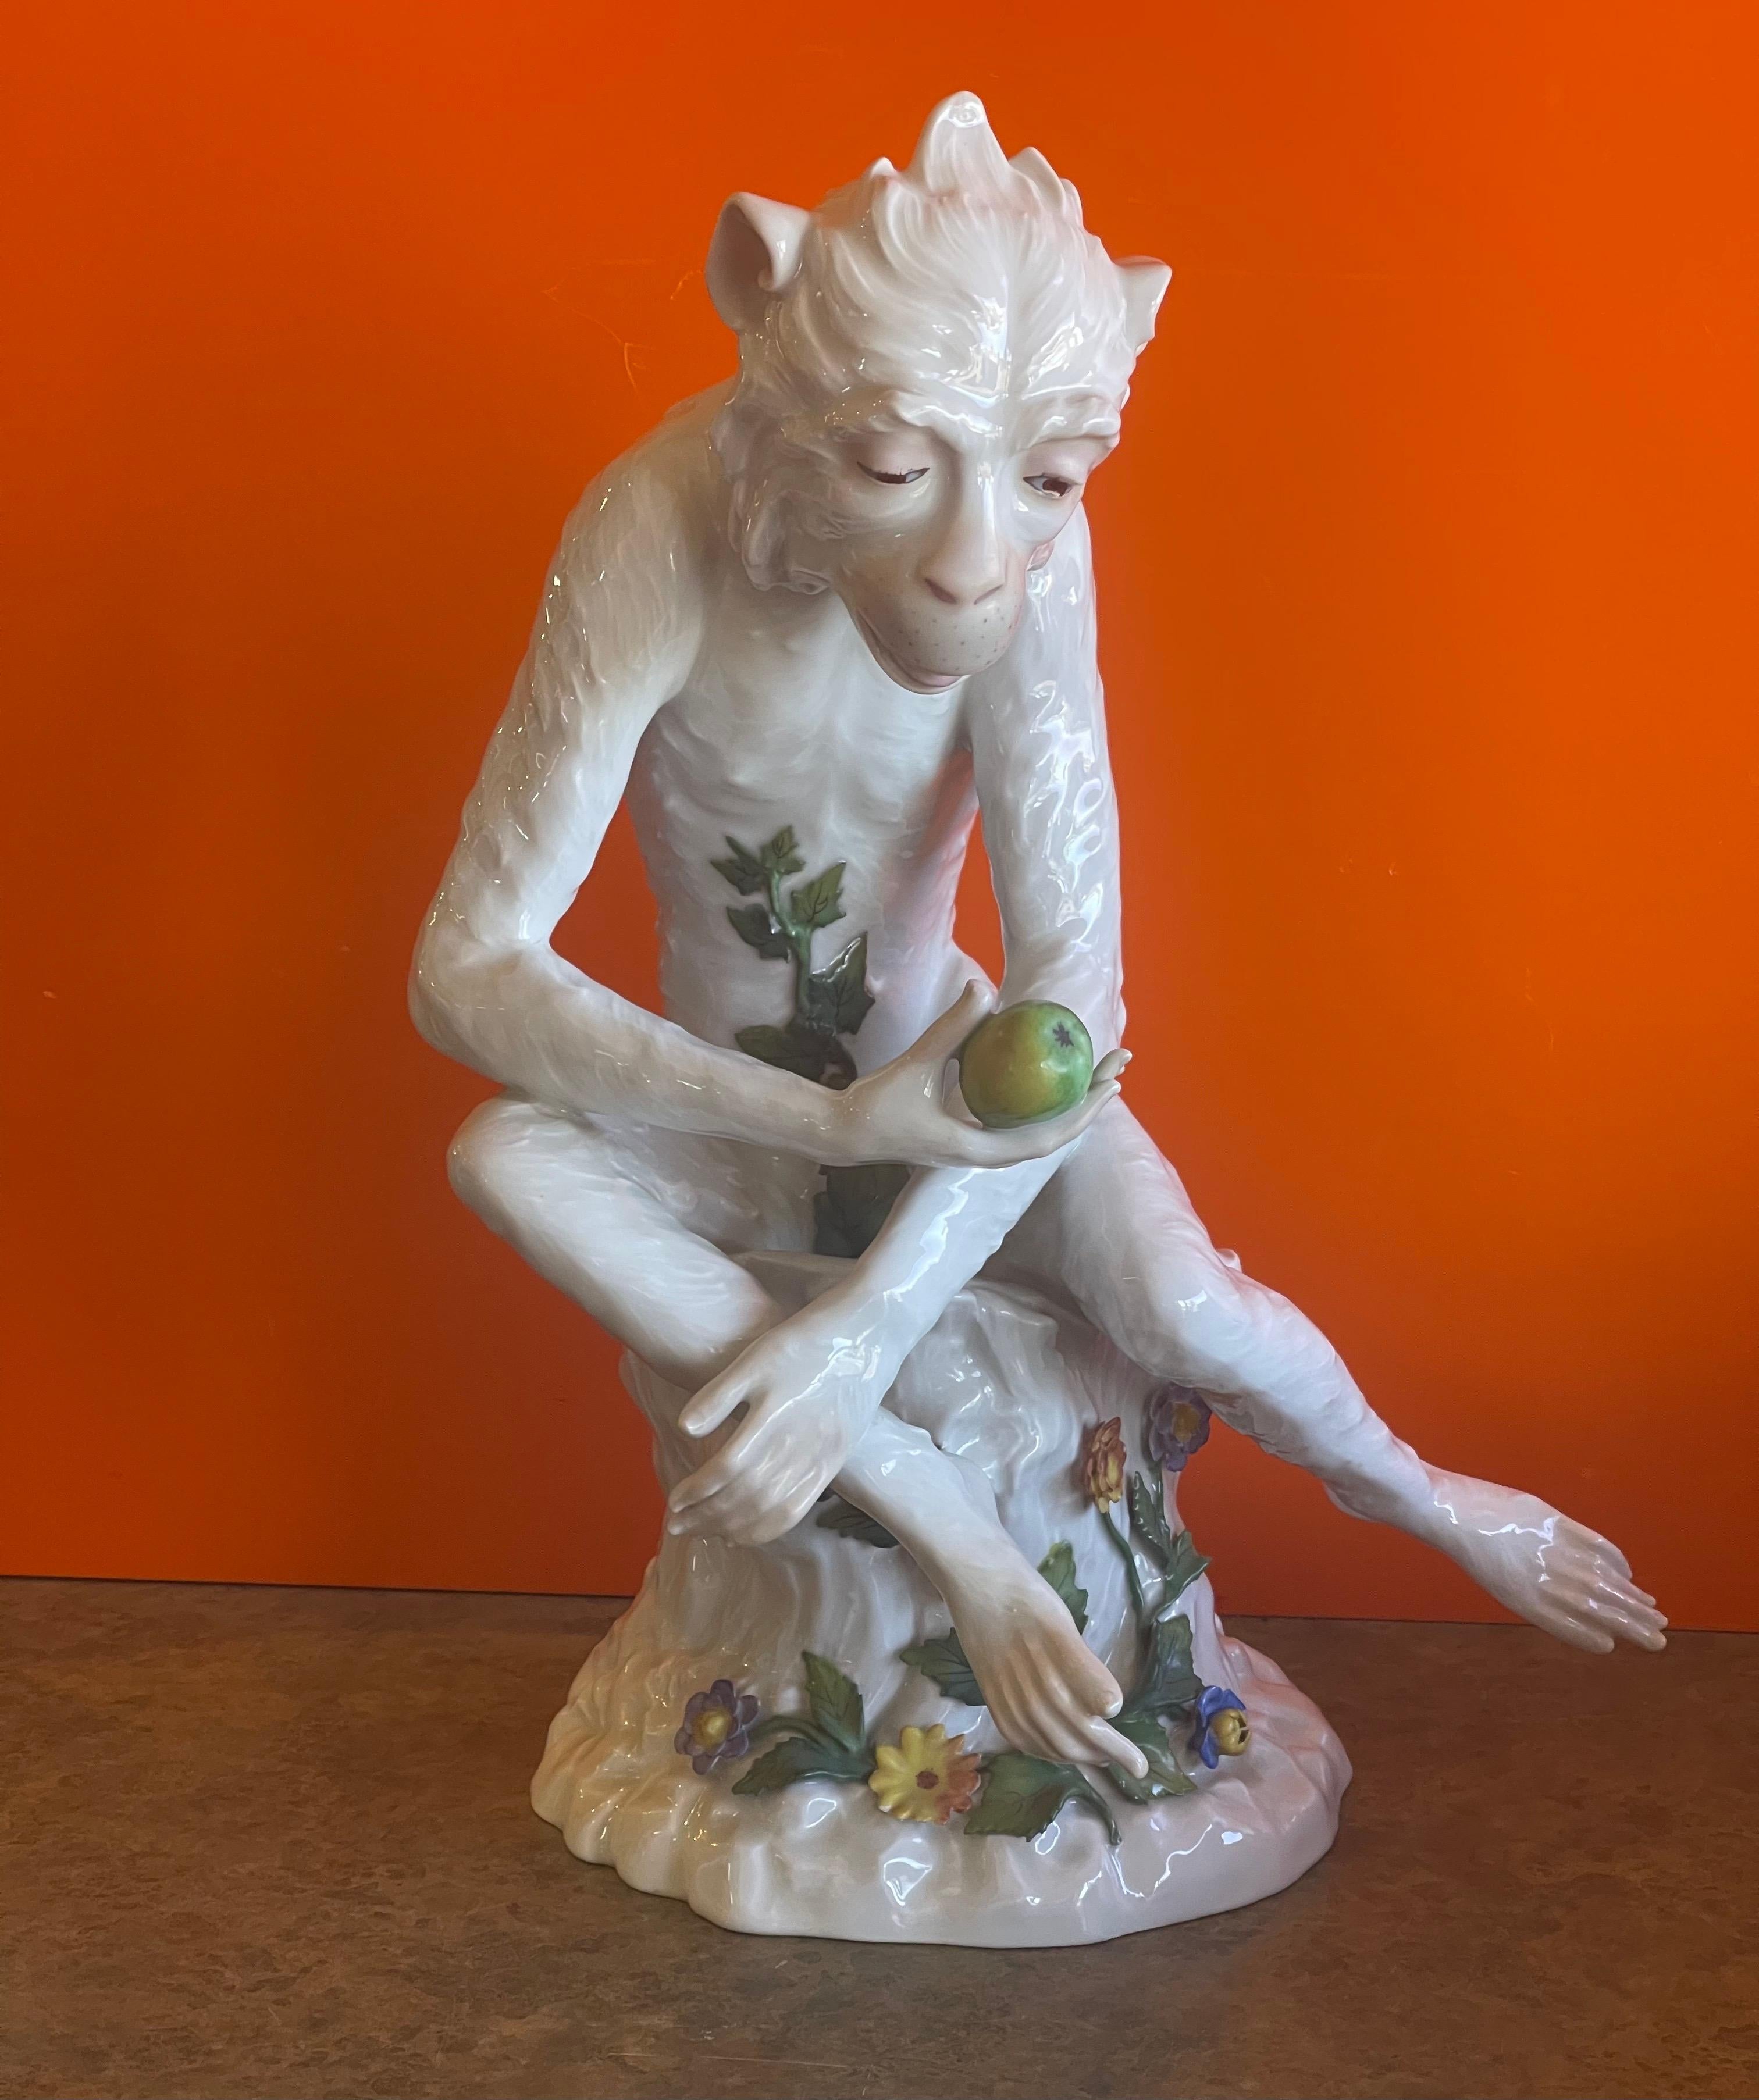 Large antique porcelain monkey sculpture based on the design by Johann Gottlieb Kirchner for Dresden Porcelain, circa 1900. The piece depicts a monkey sitting hunched over on a tree stump, holding an apple in his hand, in a naturalistic form; the